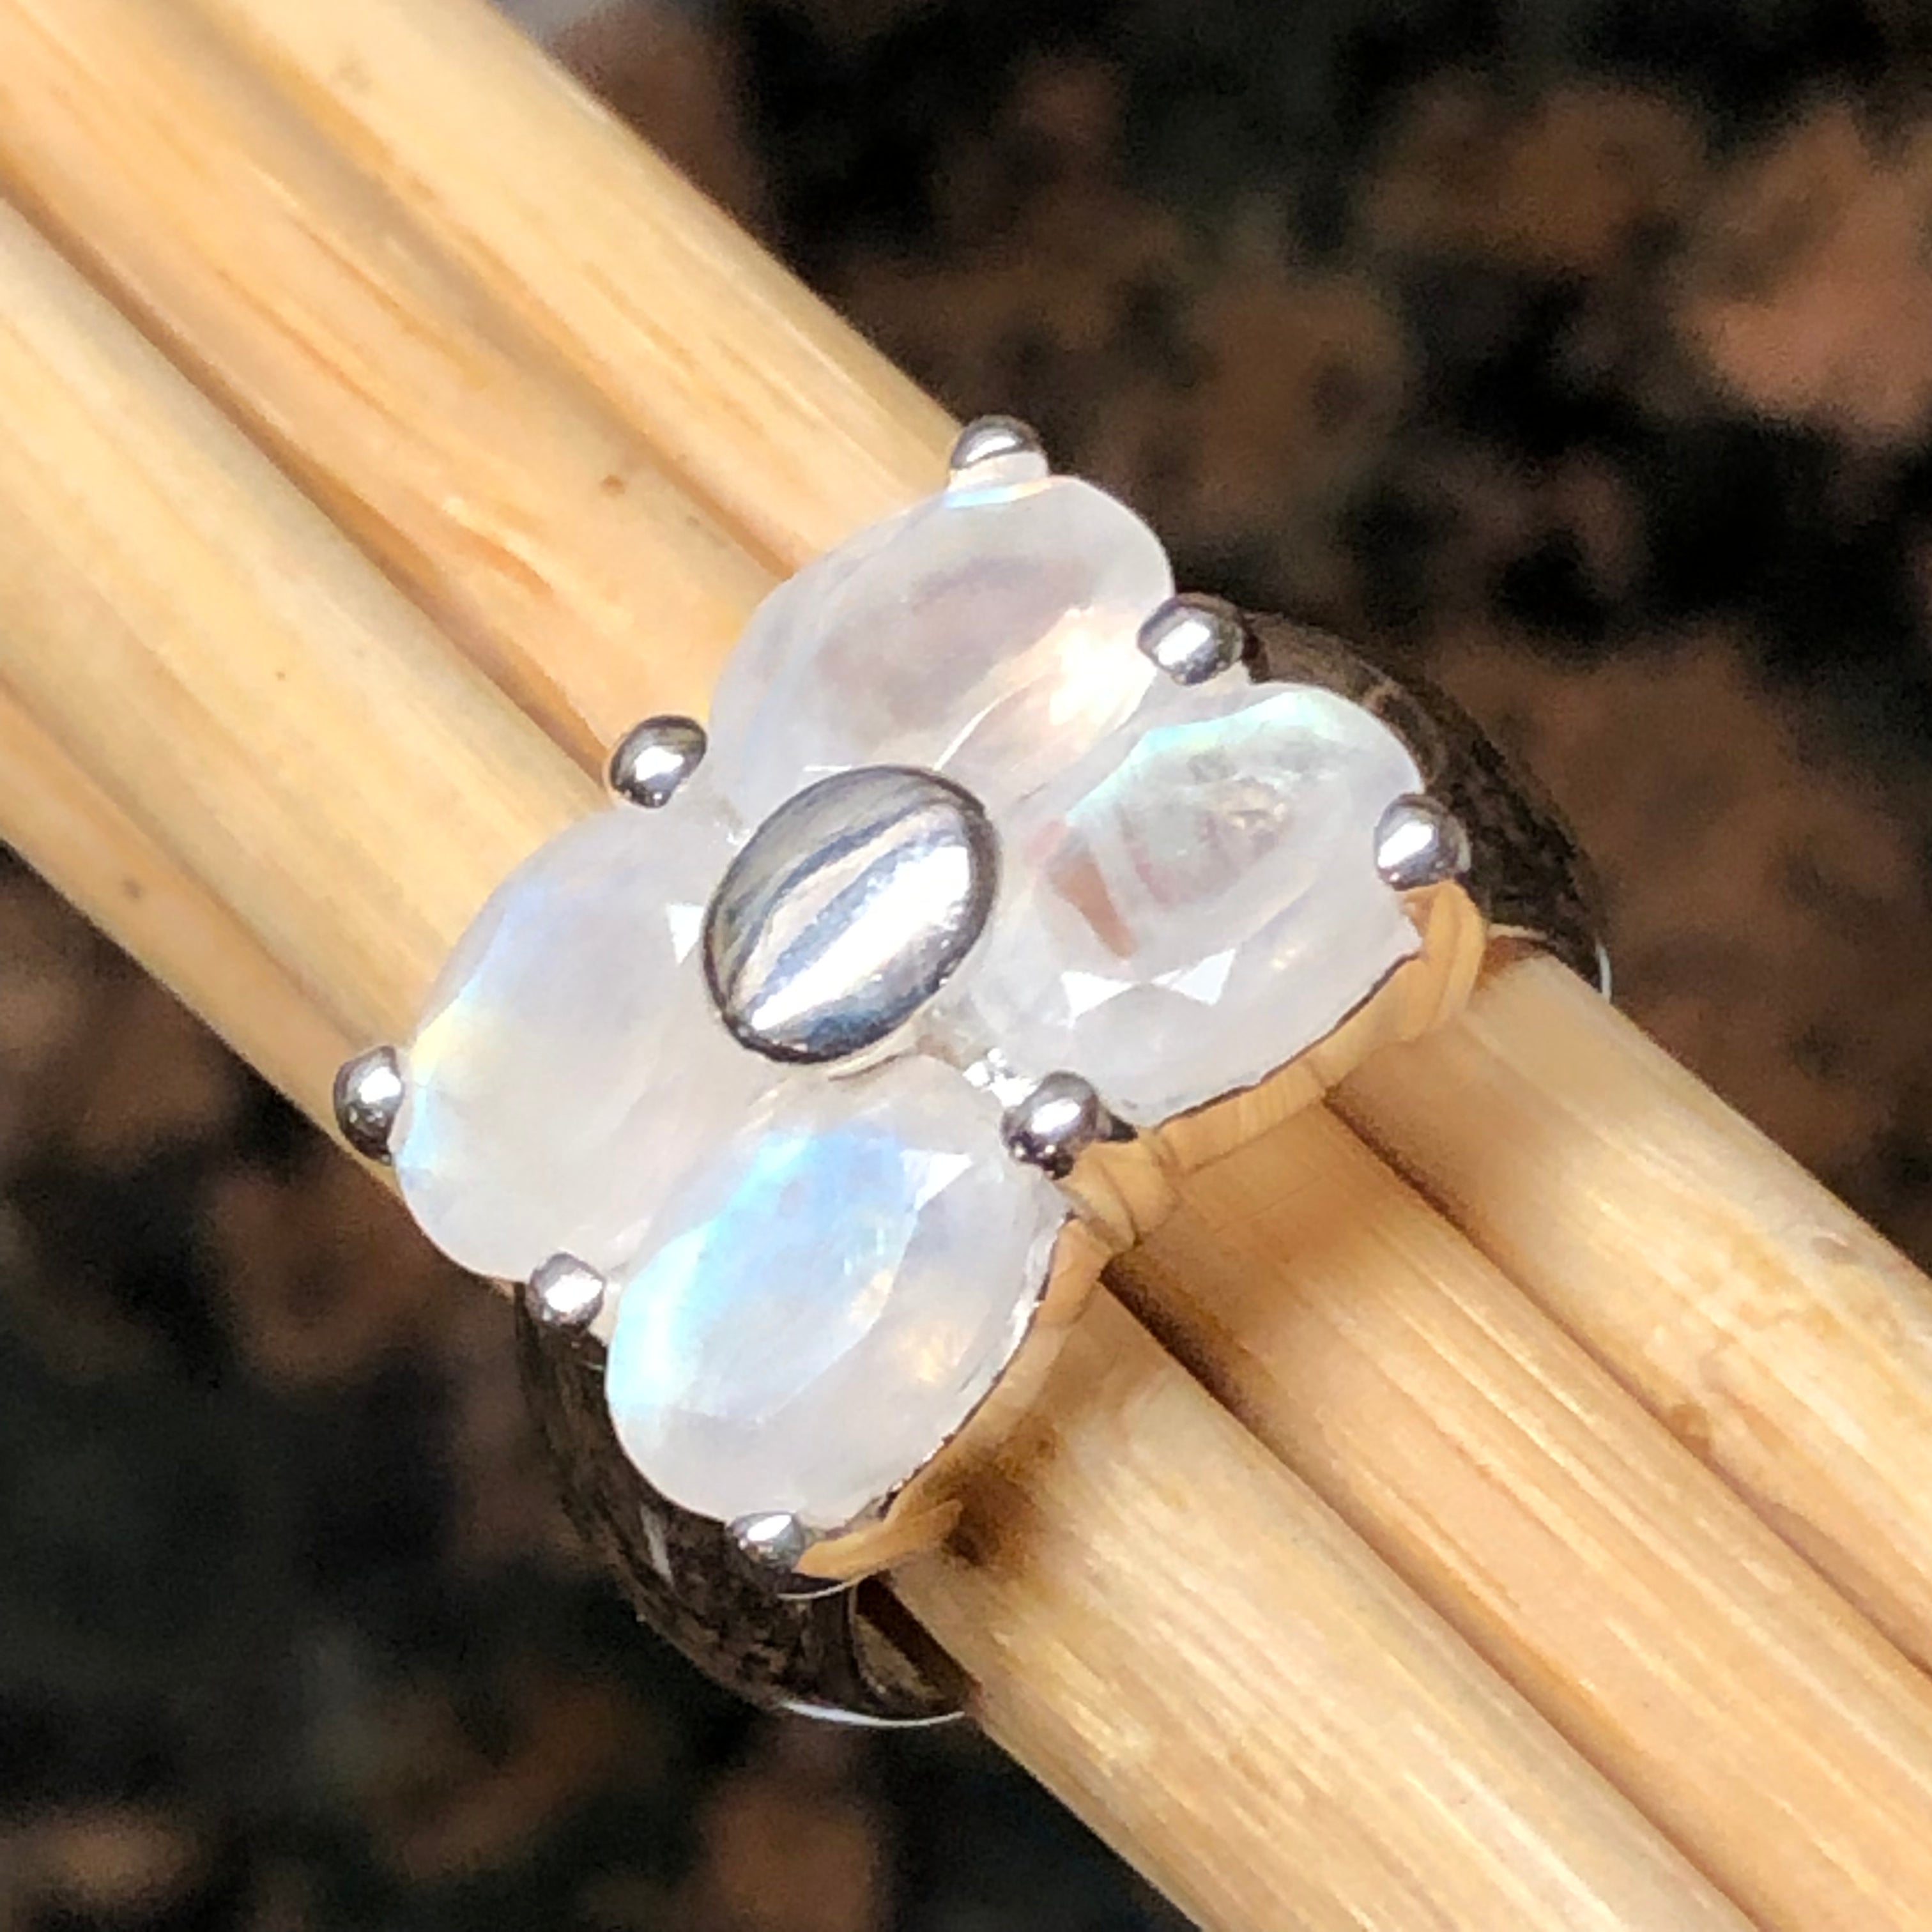 Genuine Rainbow Moonstone 925 Solid Sterling Silver Wedding Ring Size 6, 7, 8, 9 - Natural Rocks by Kala